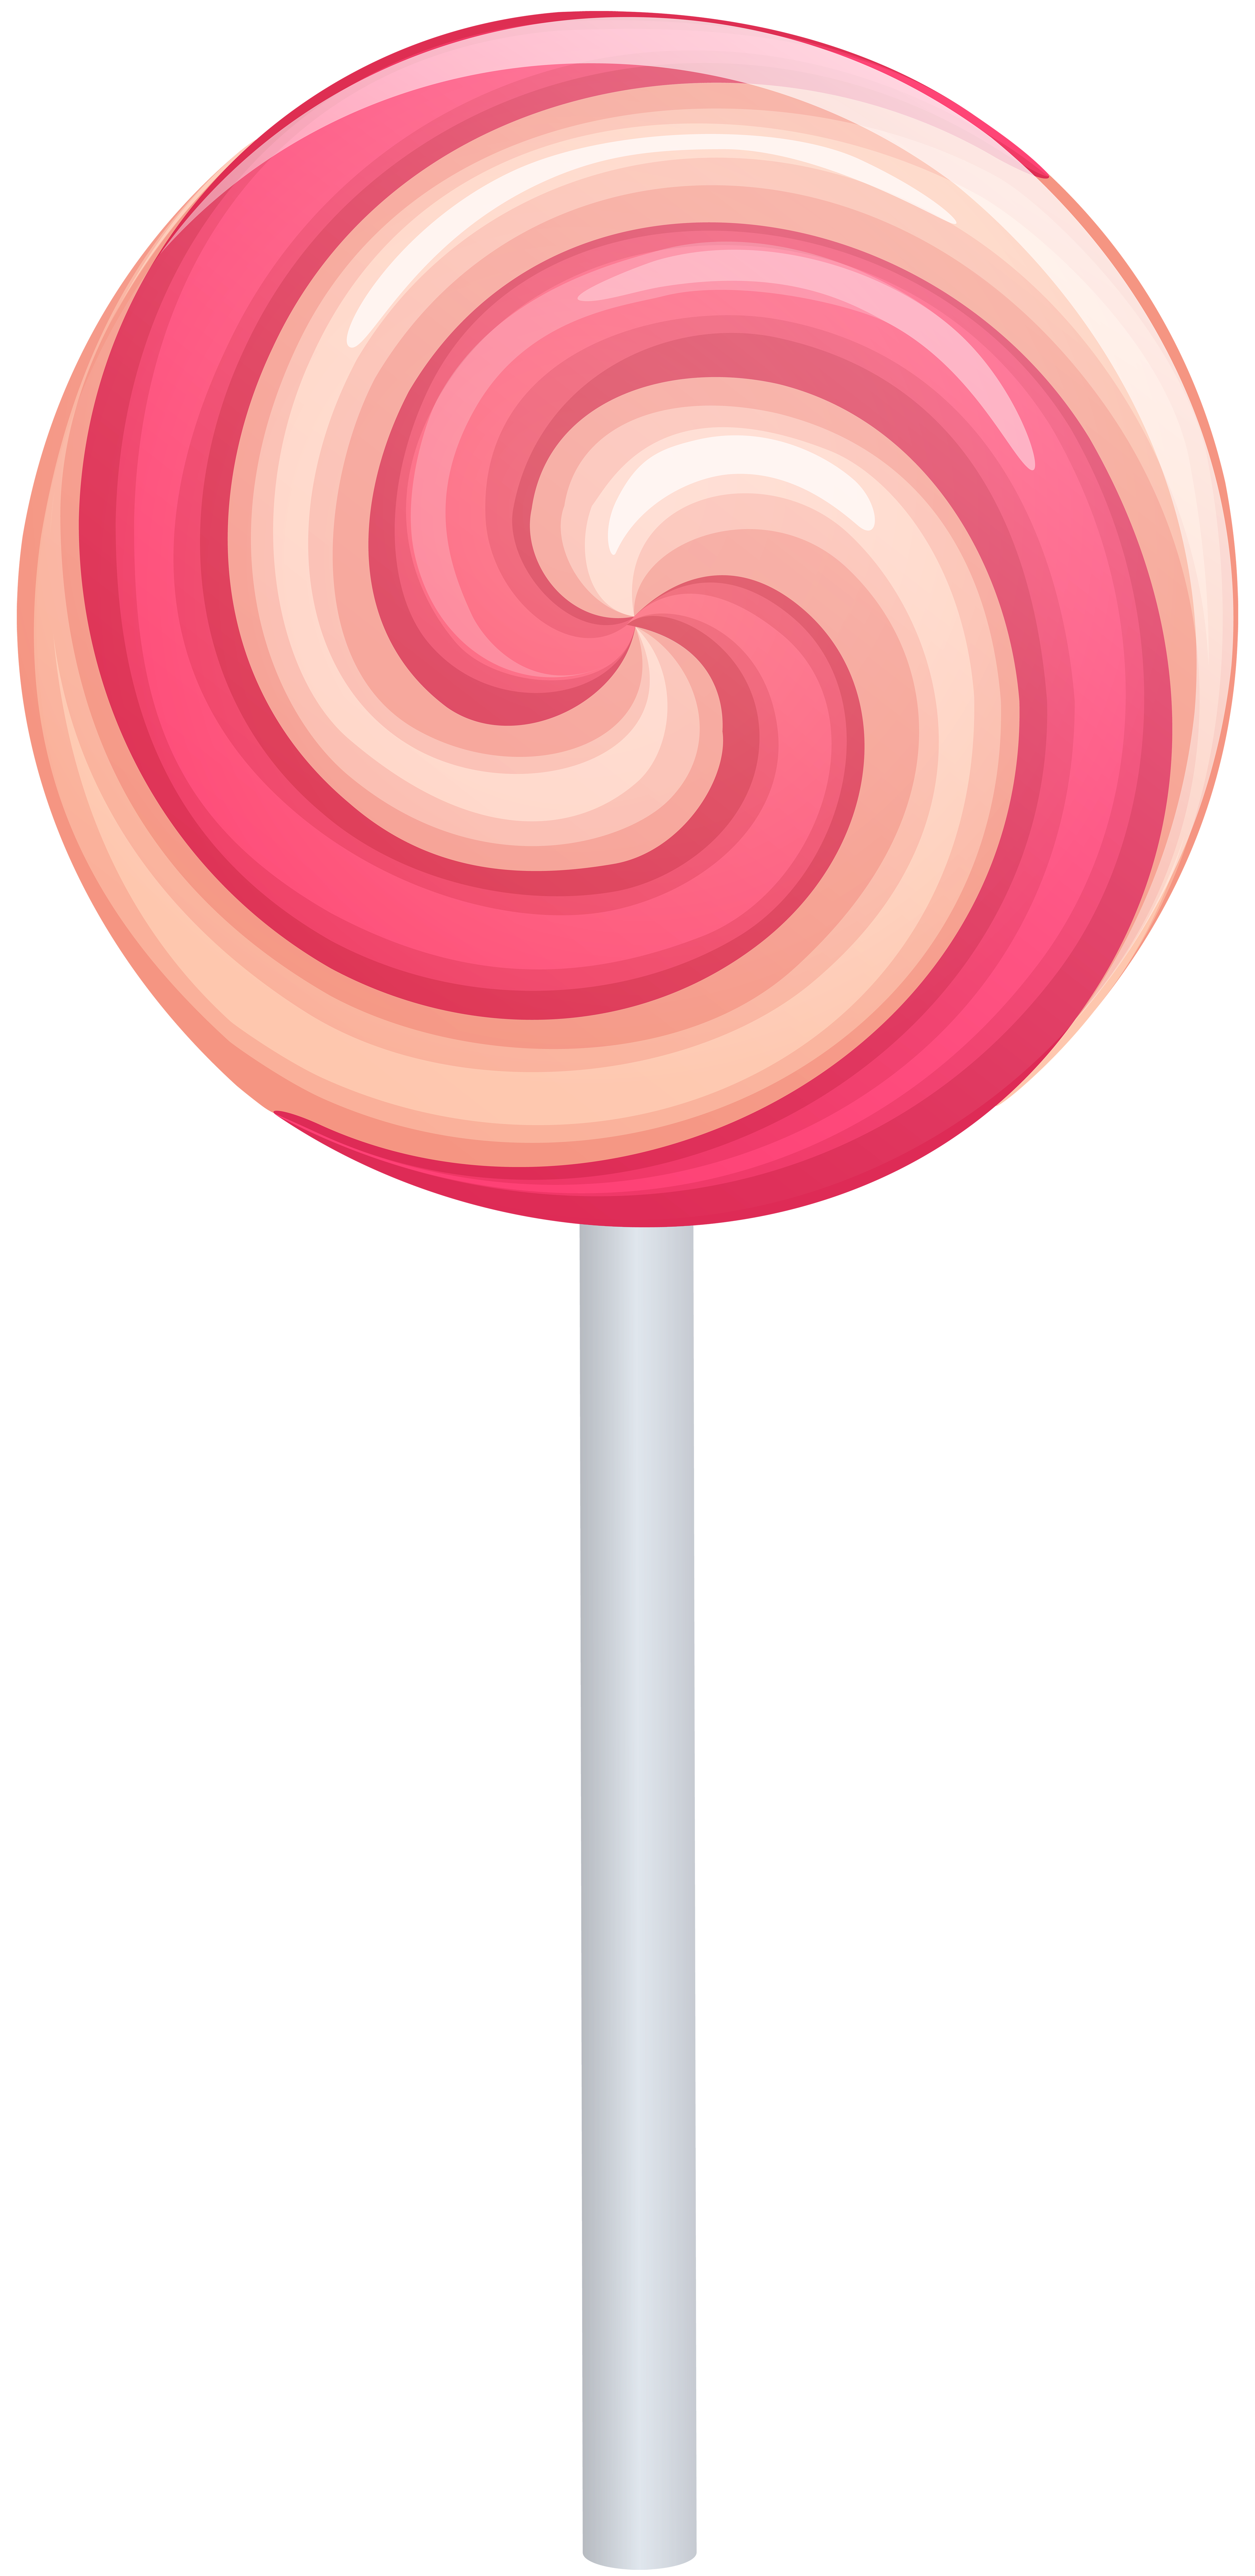 Pink Swirl Lollipop Png Clip Art Image Gallery Yopriceville Images, Photos, Reviews